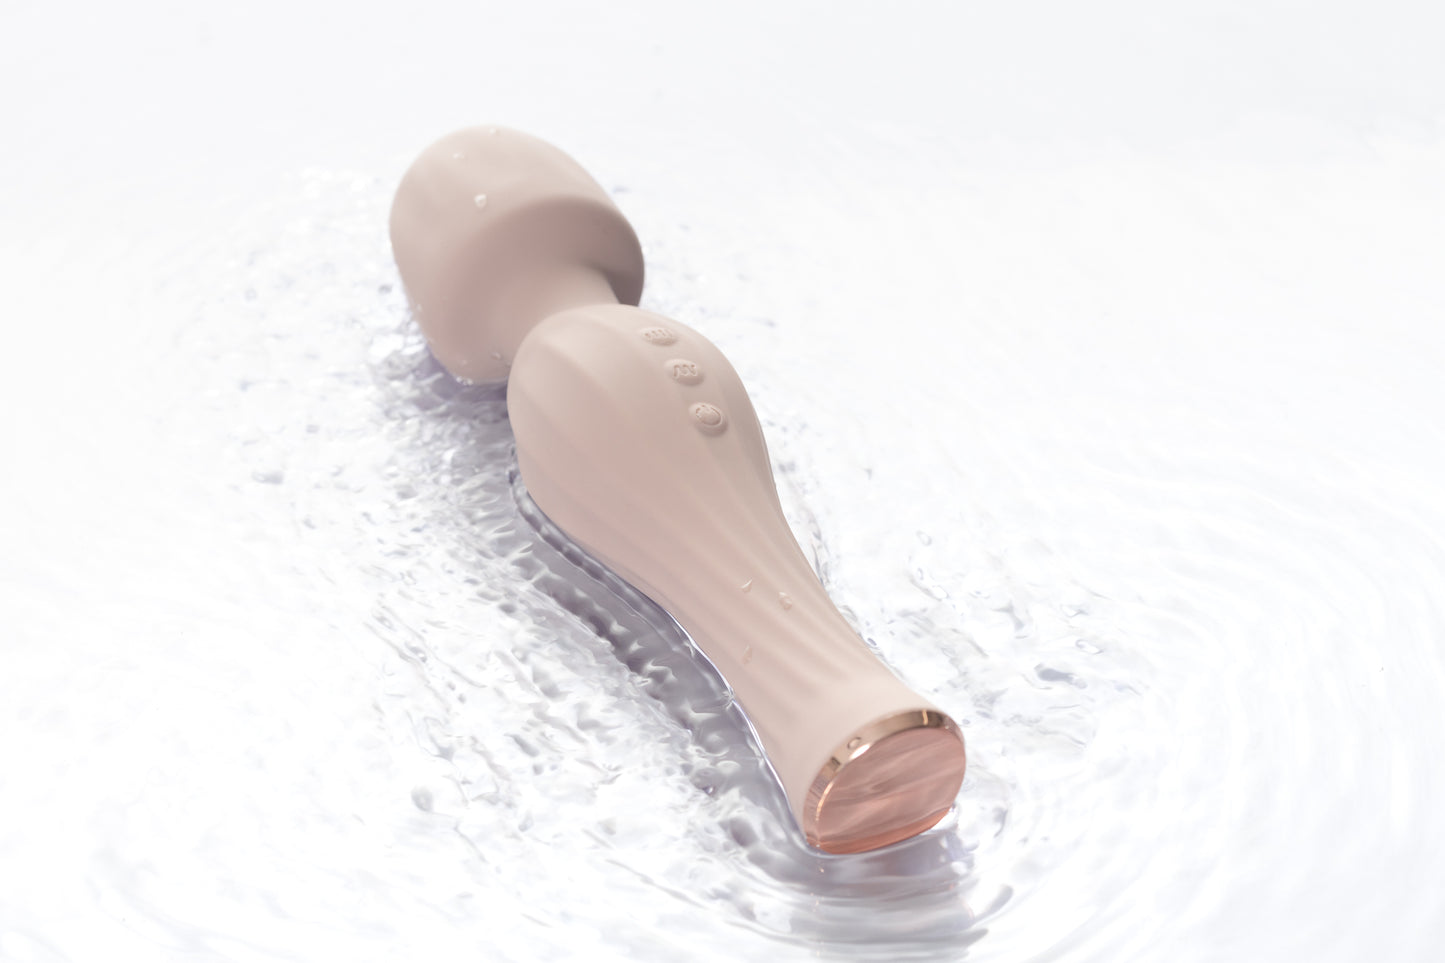 Submersible Body-Safe Cleopatra wand Vibrator - Shower and Bath Bliss